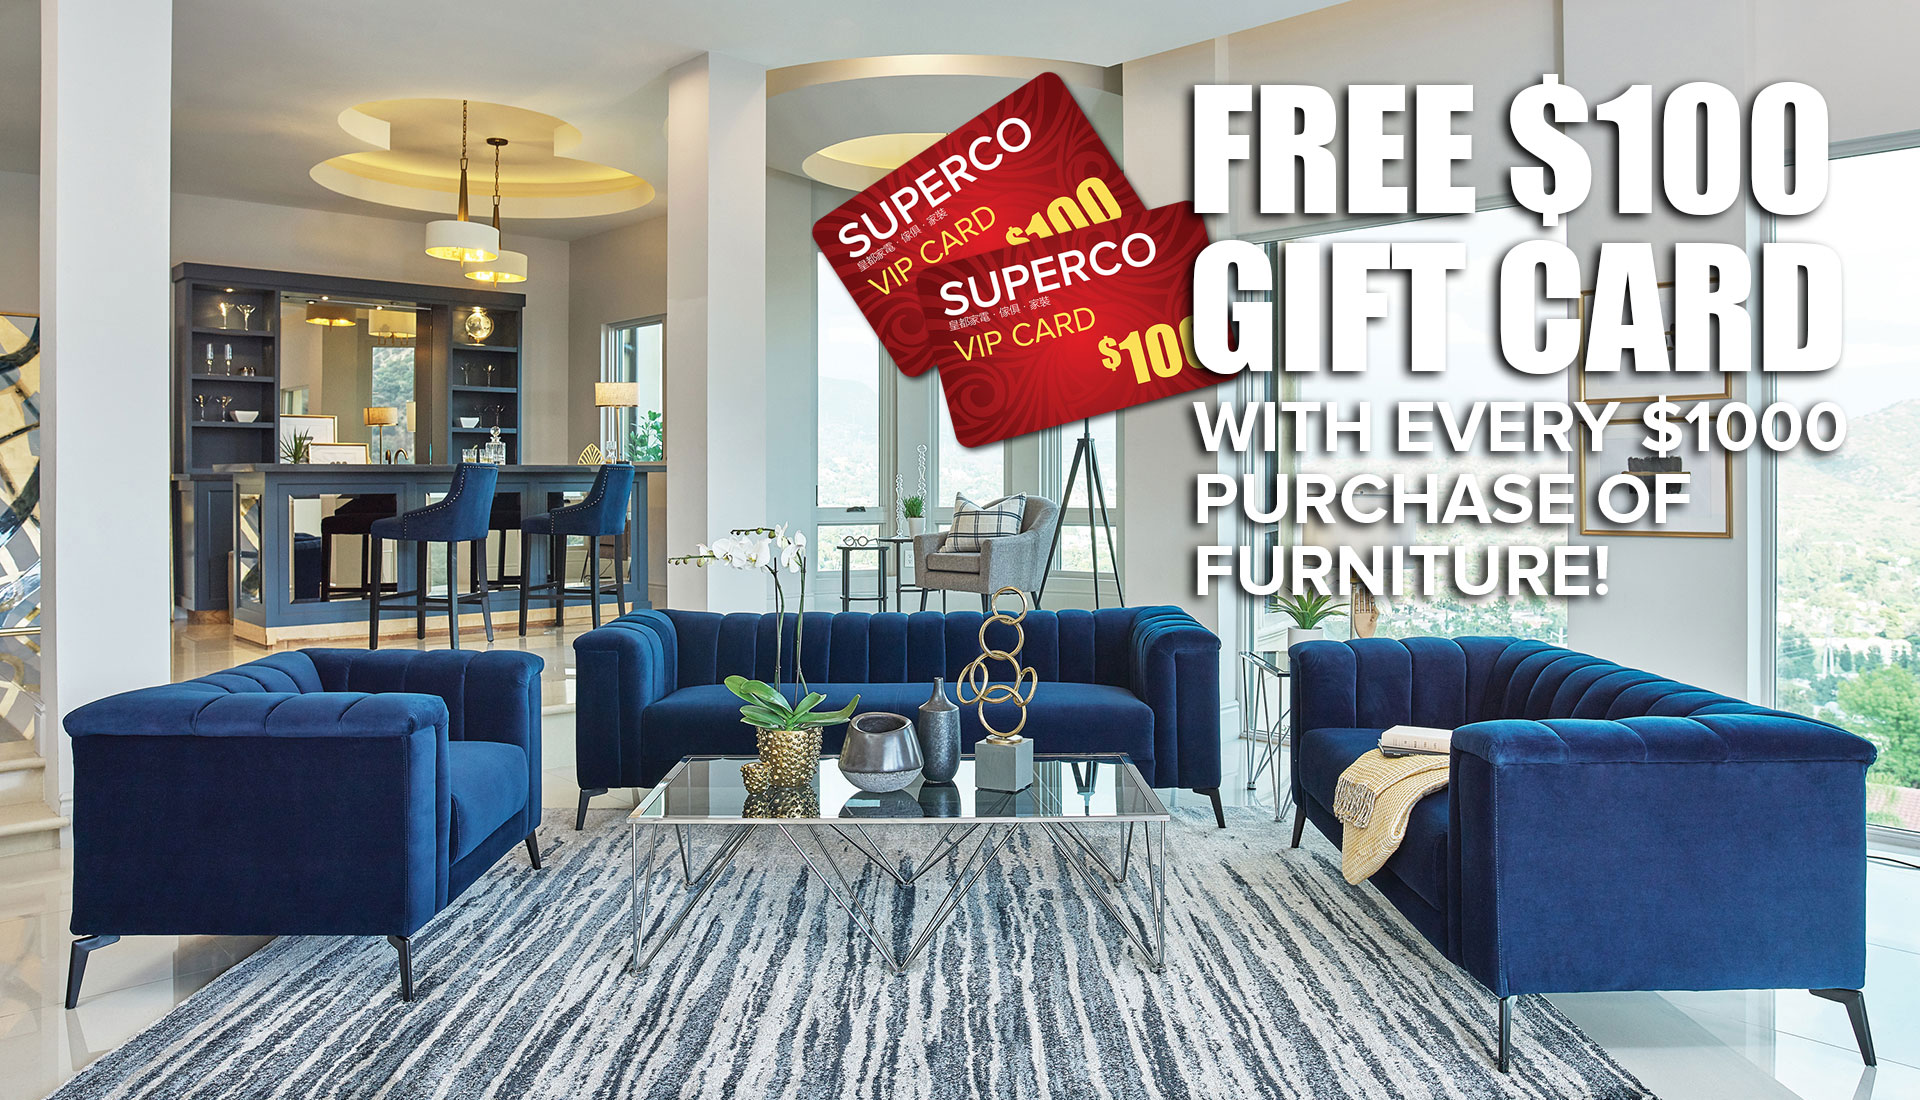 Free Gift Card with Furniture Purchase